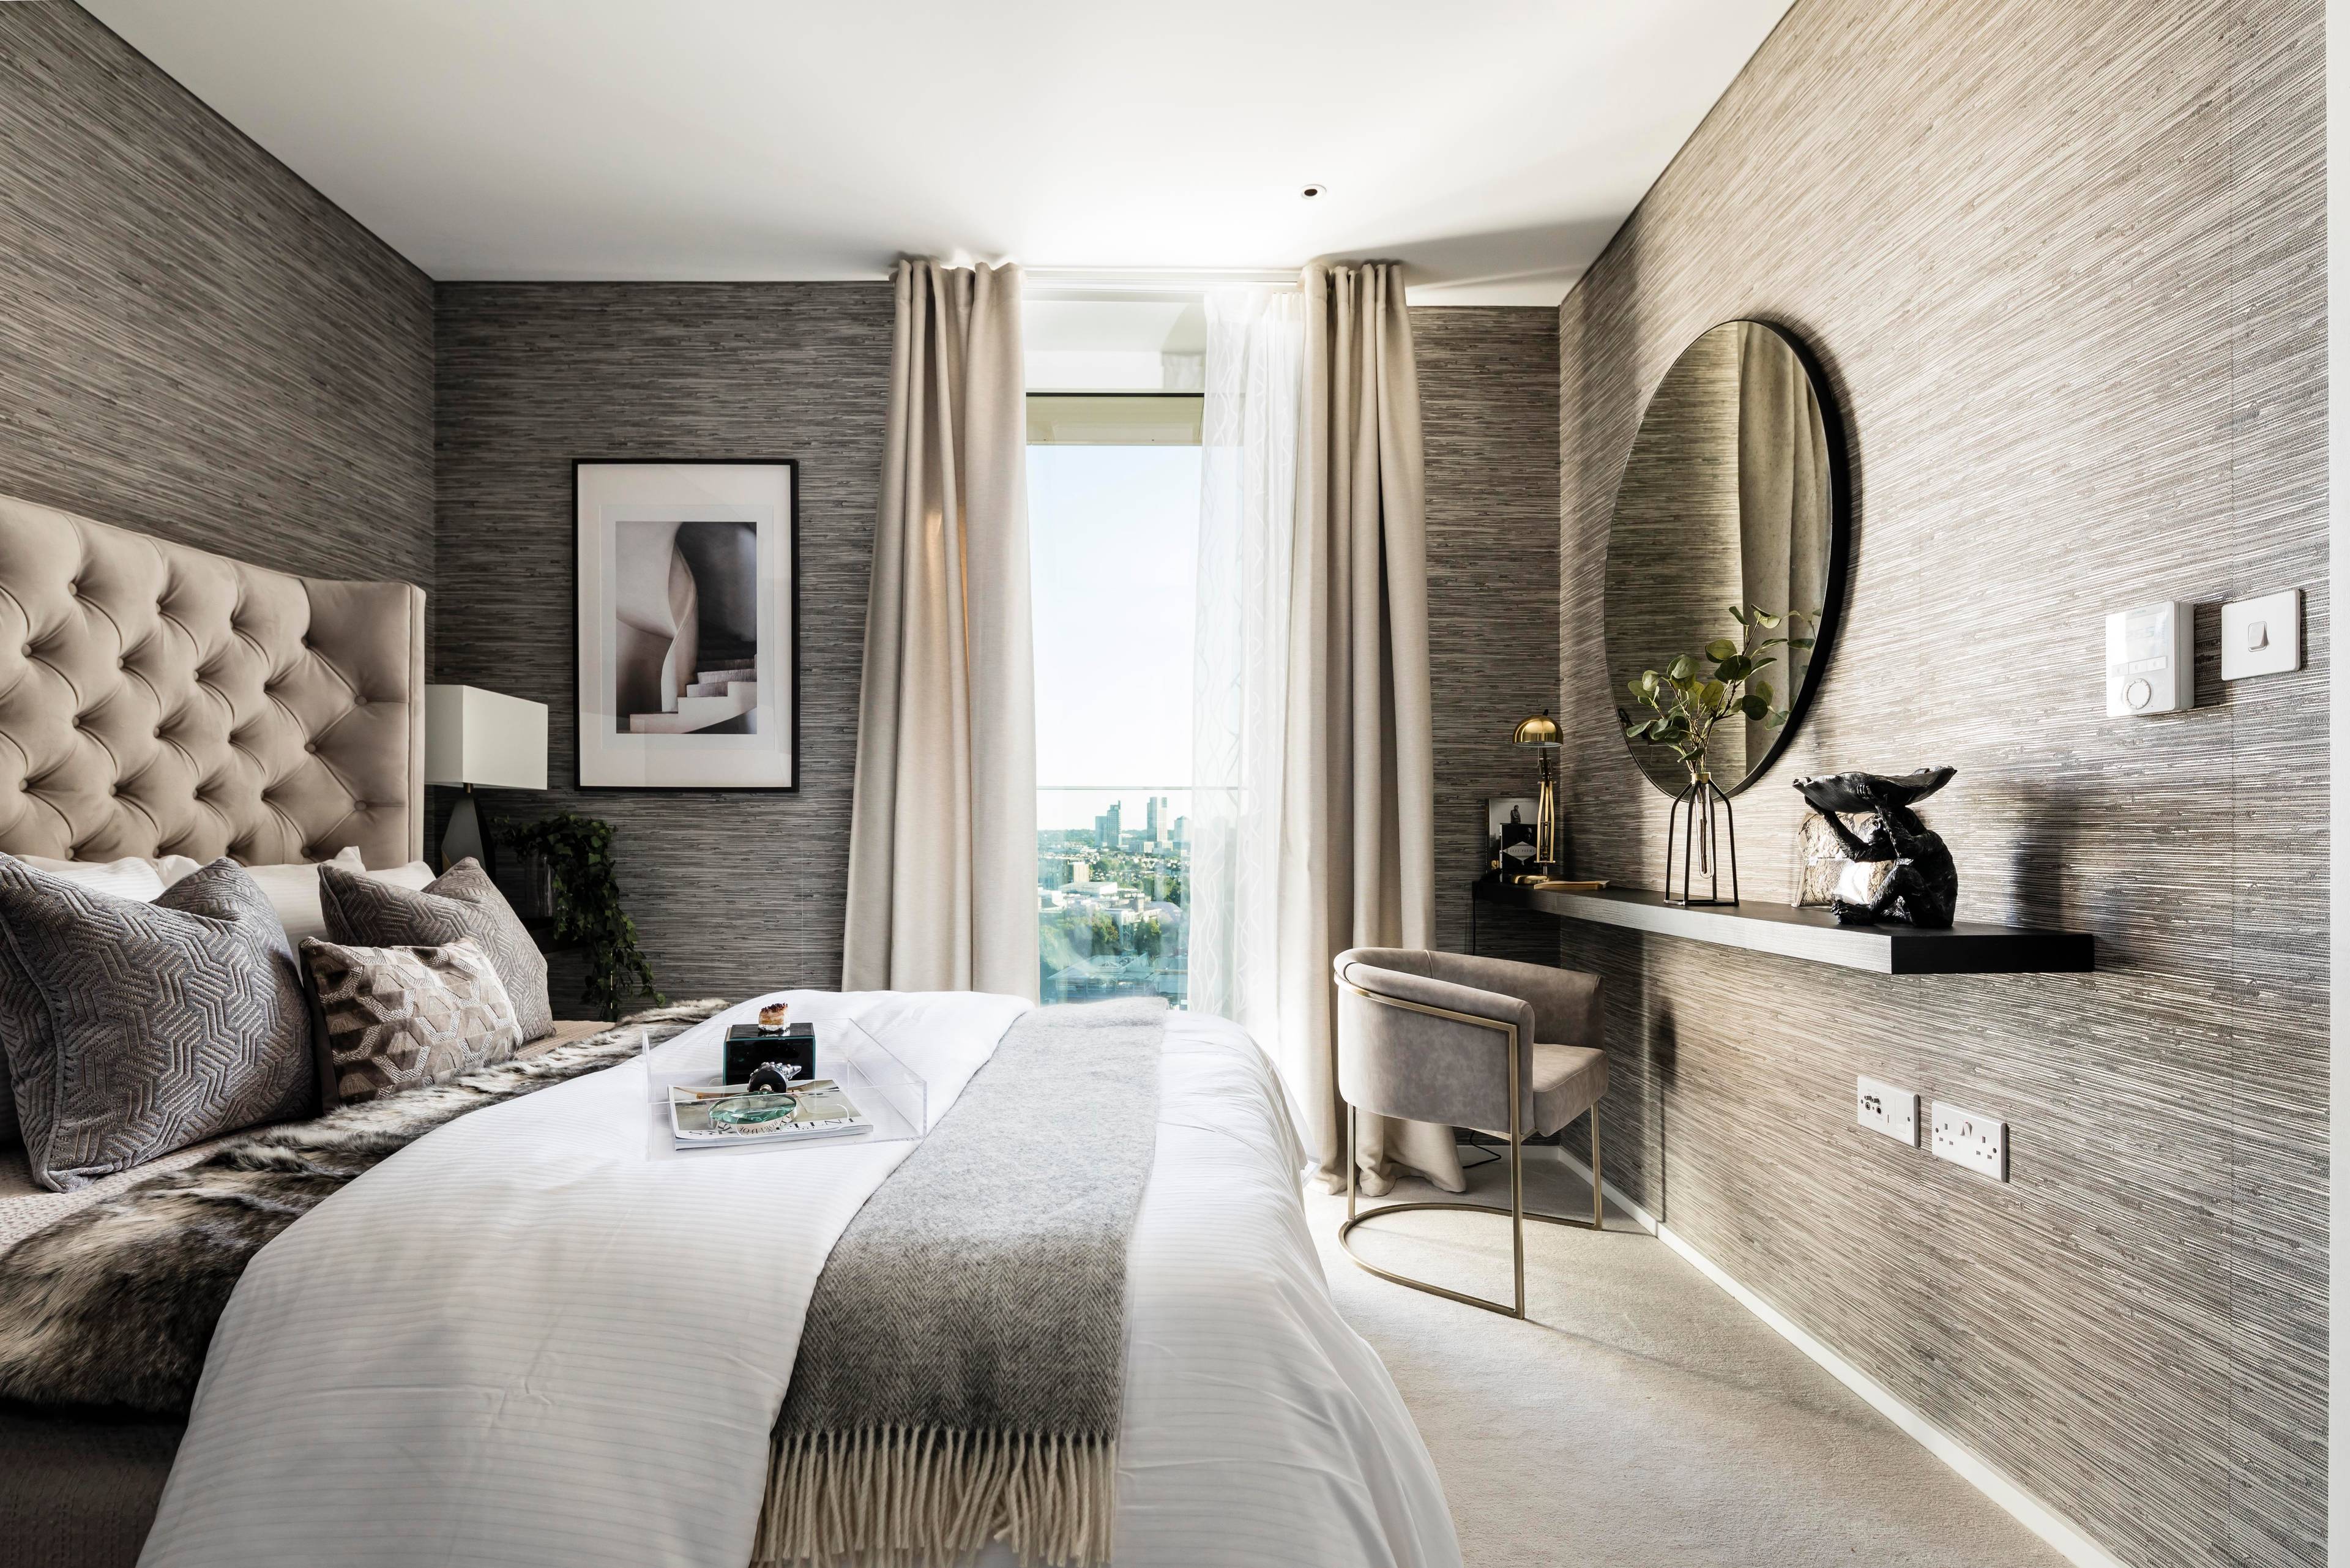 A contemporary one-bedroom apartment situated in Avanton's exciting inaugural development - Coda Residences, Battersea.